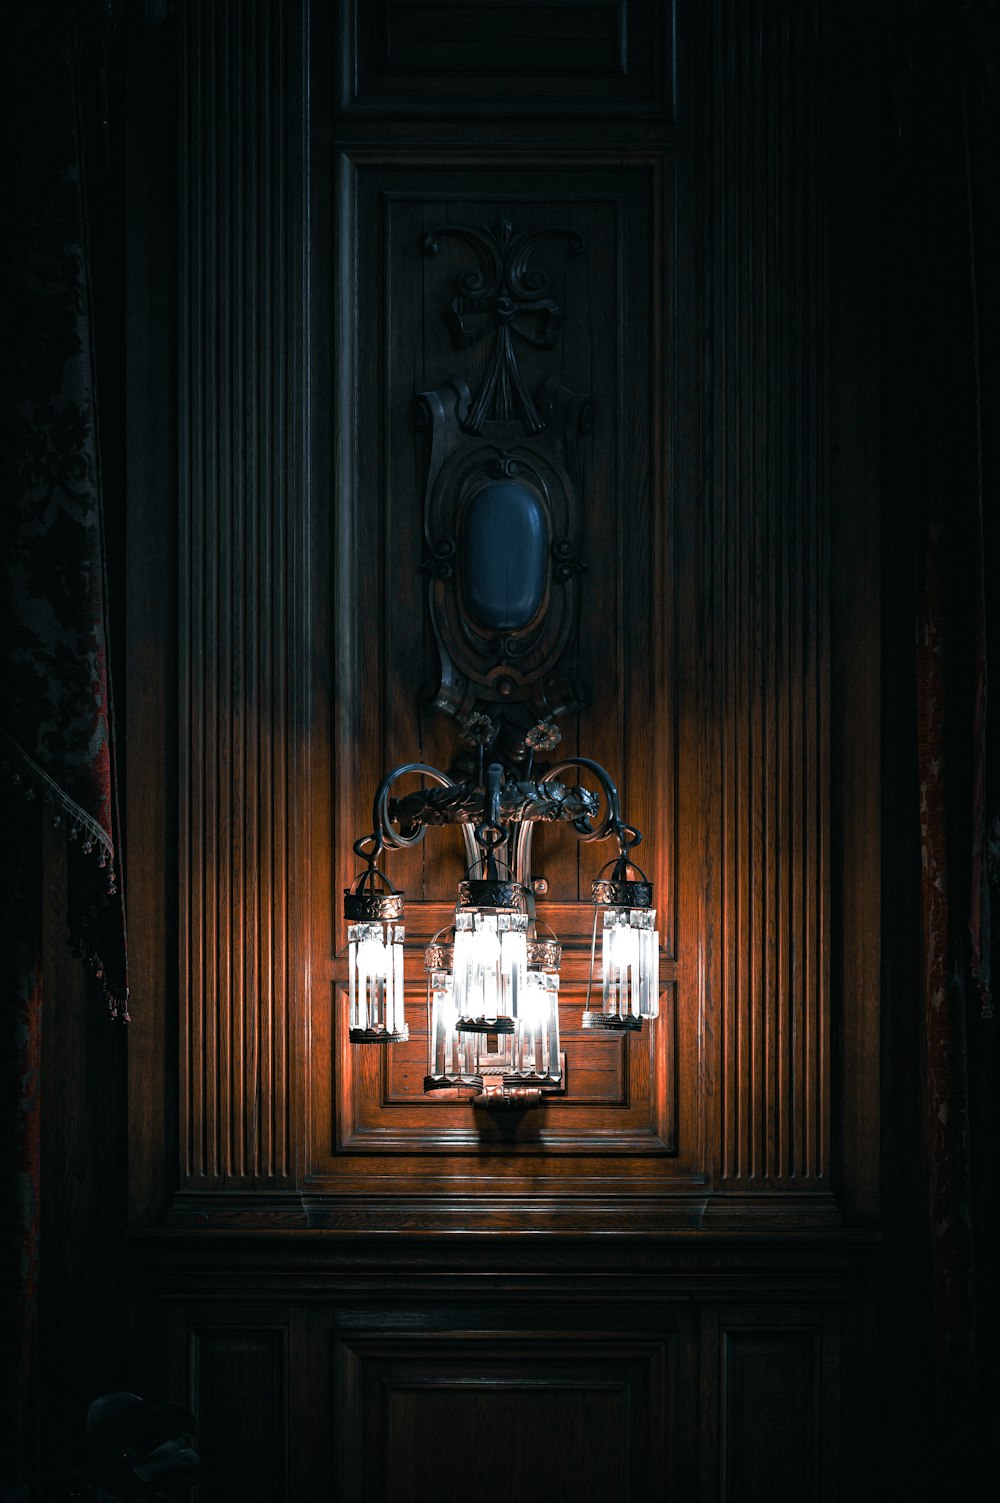 a chandelier in a dark room with a mirror on the wall